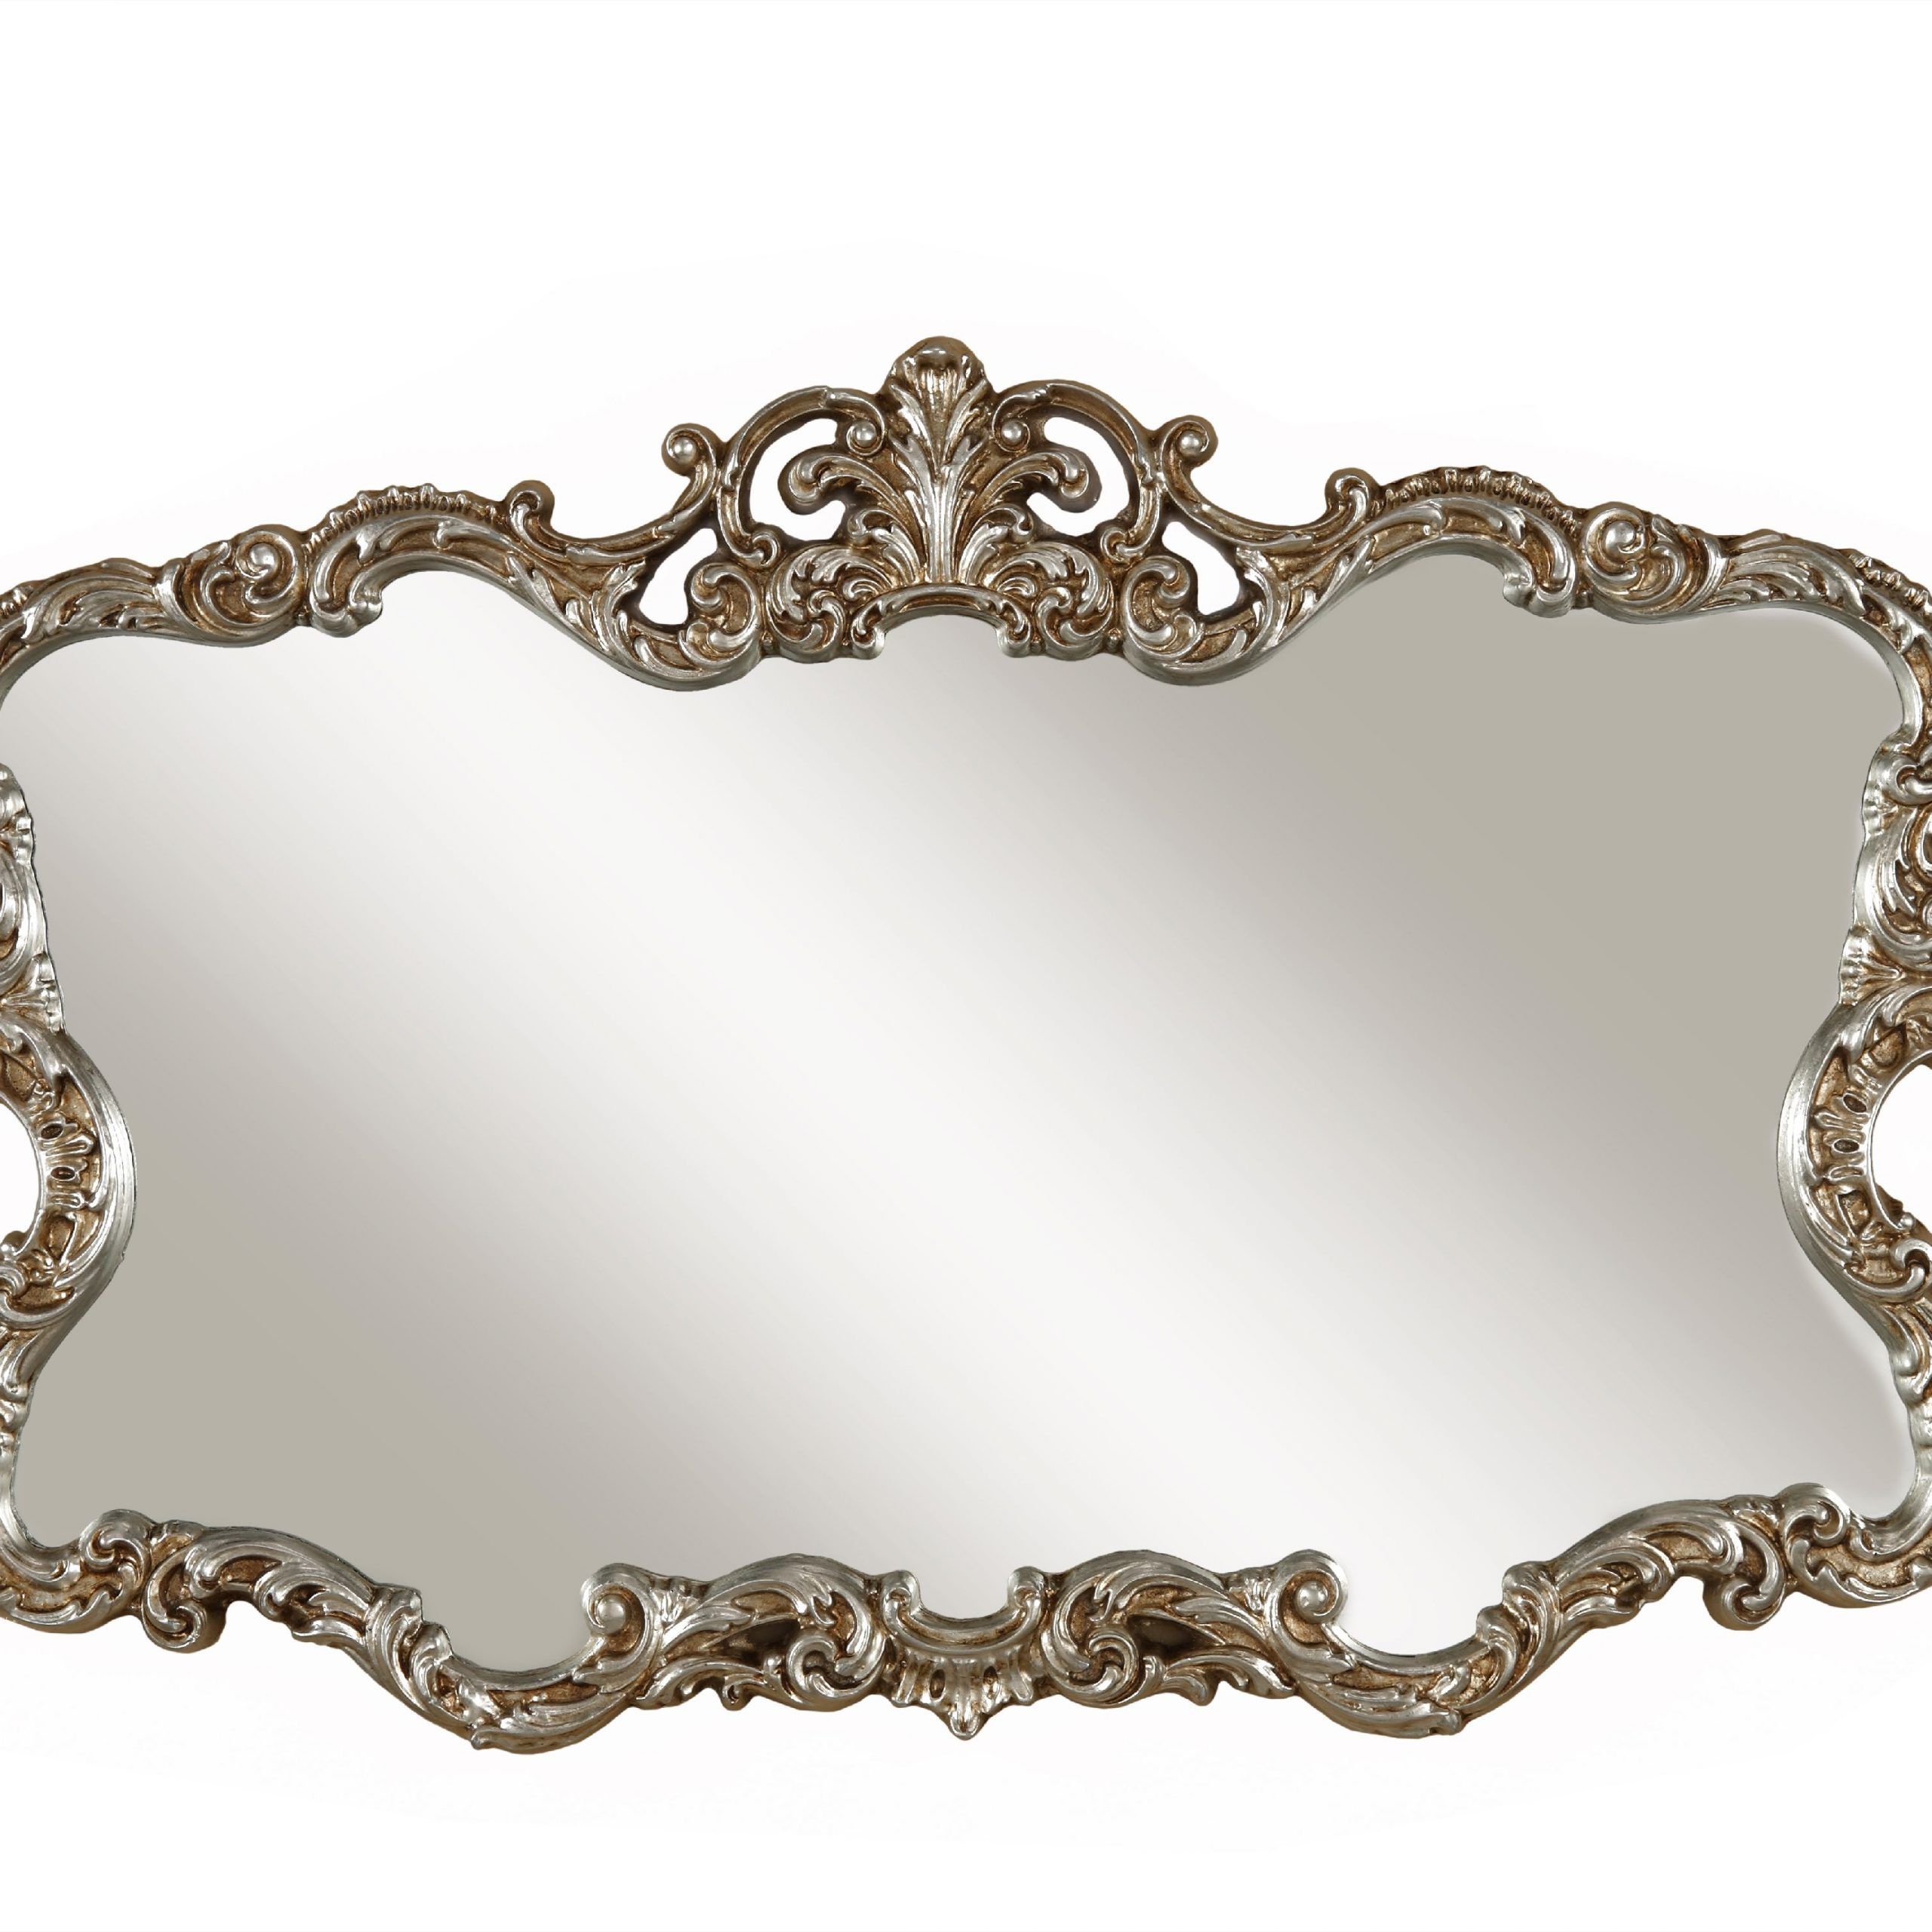 Famous Big Aureate Antique Silver Decorative Wall Mirrormartin Svensson Within Antiqued Silver Quatrefoil Wall Mirrors (View 12 of 15)